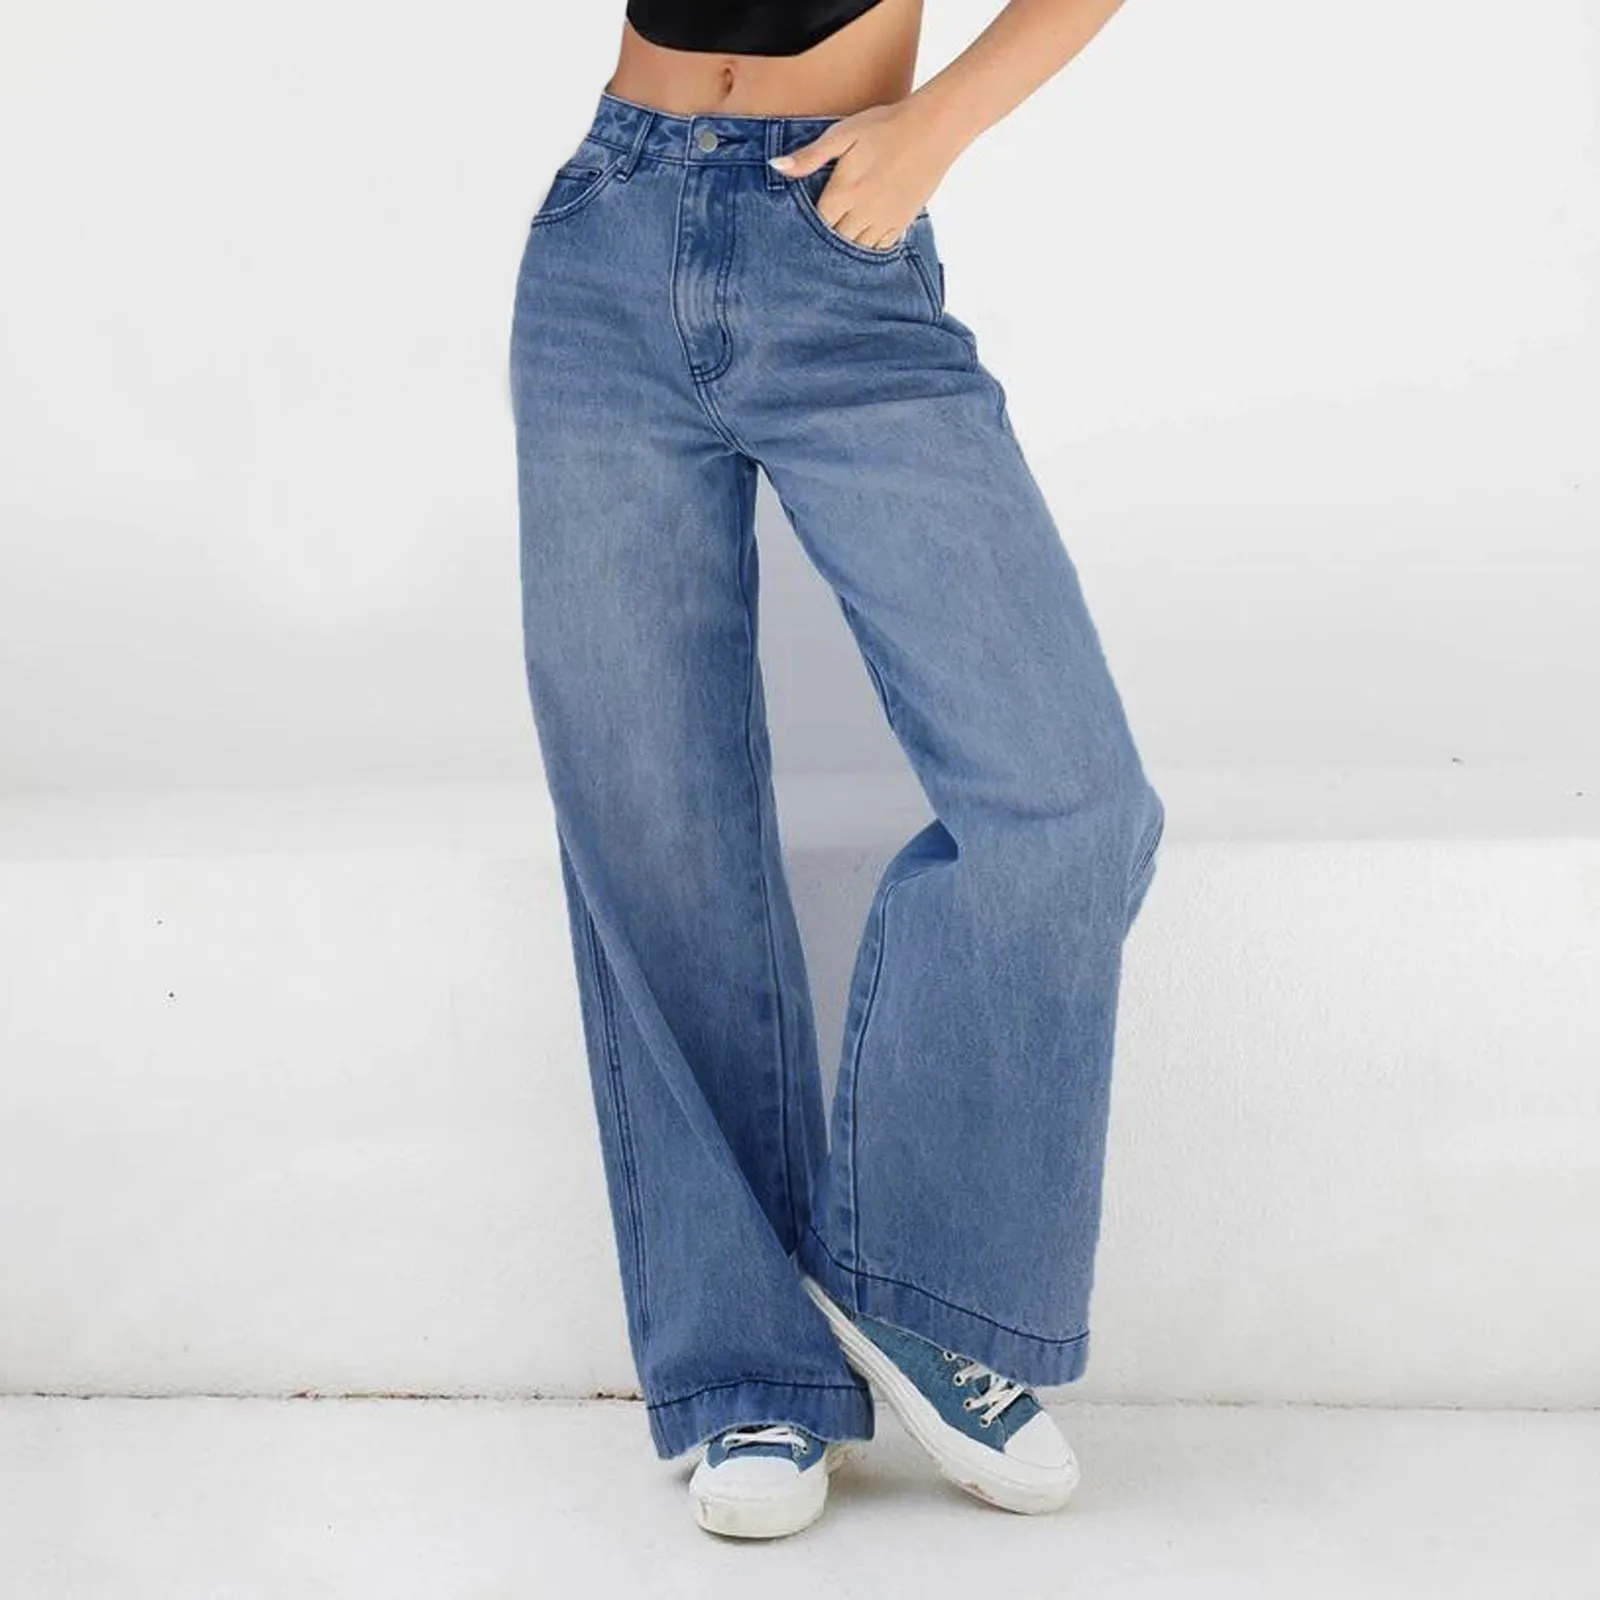 

Women's Simple Solid Colour Washed Jeans Fashion Casual Versatile Pocket Denim Pants High Waisted Loose Wide Leg Denim Trousers